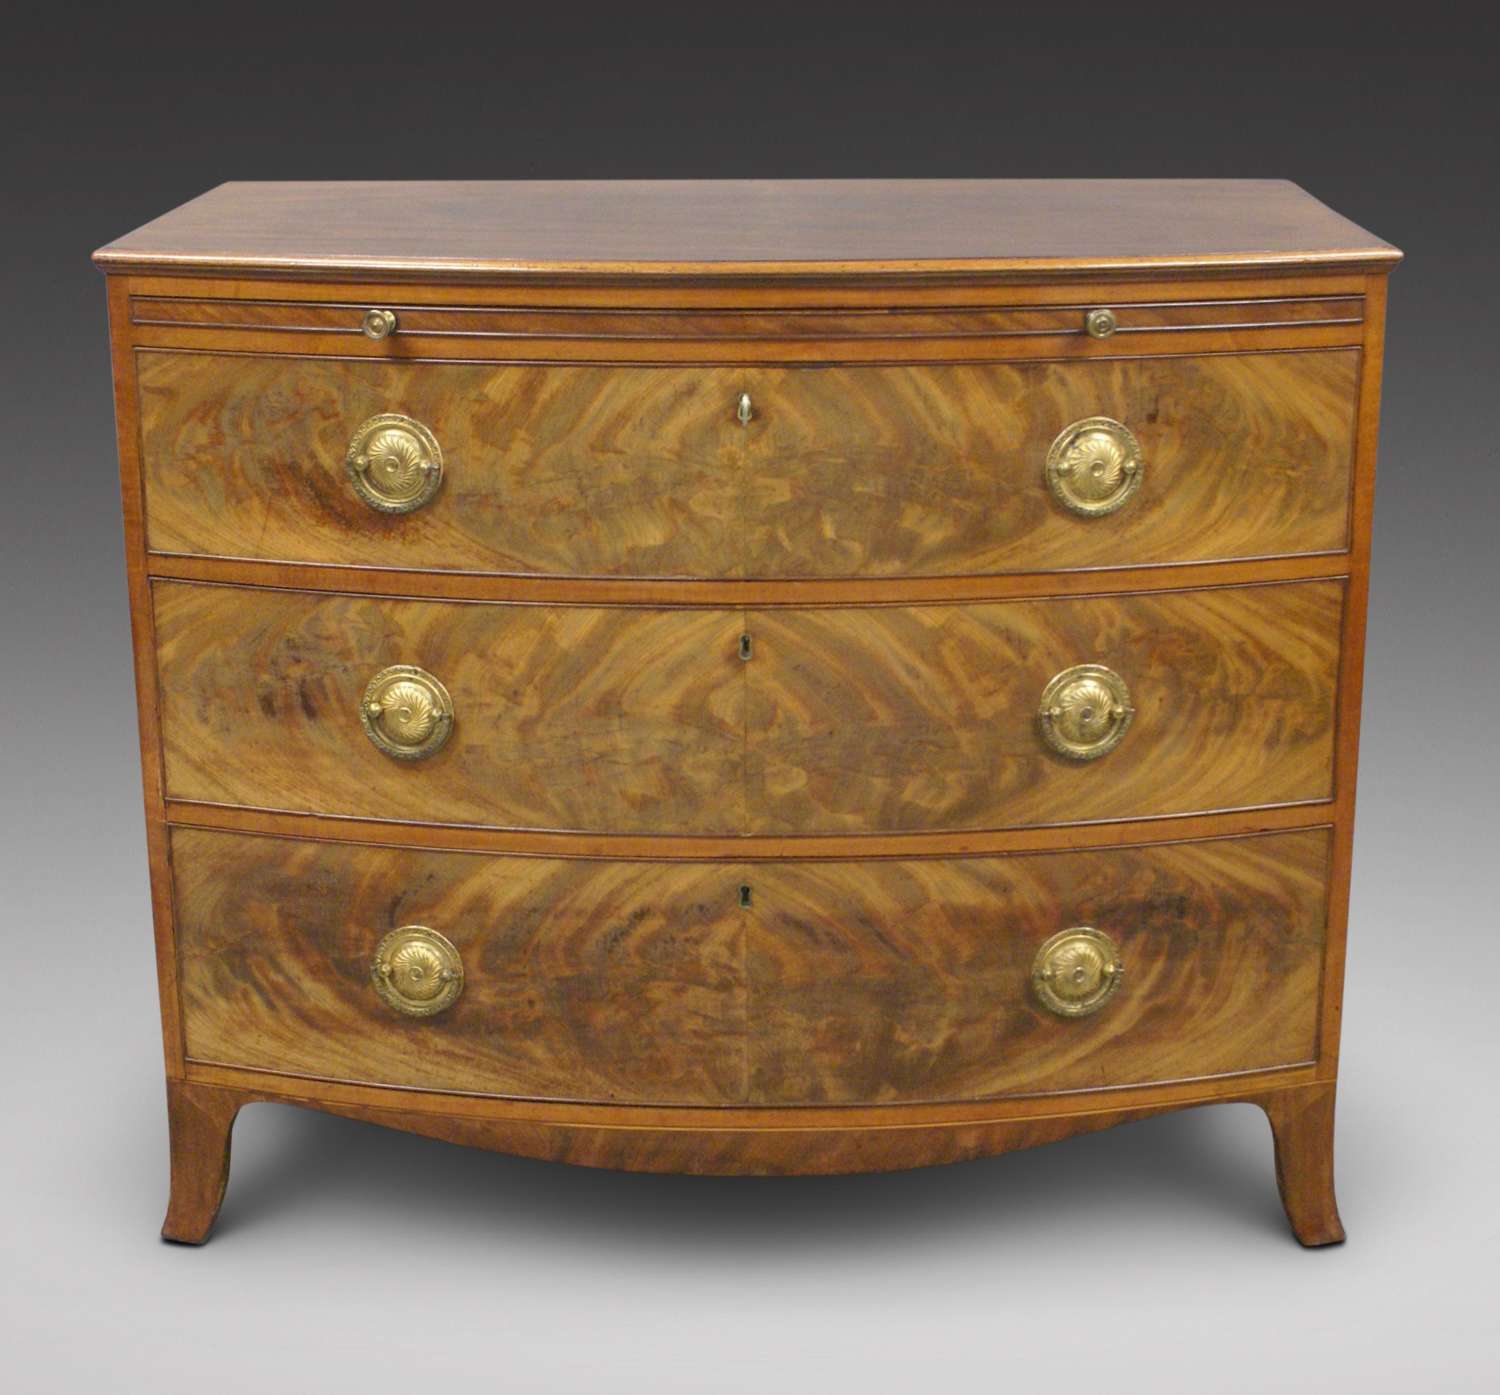 George III period mahogany bow-fronted chest of drawers